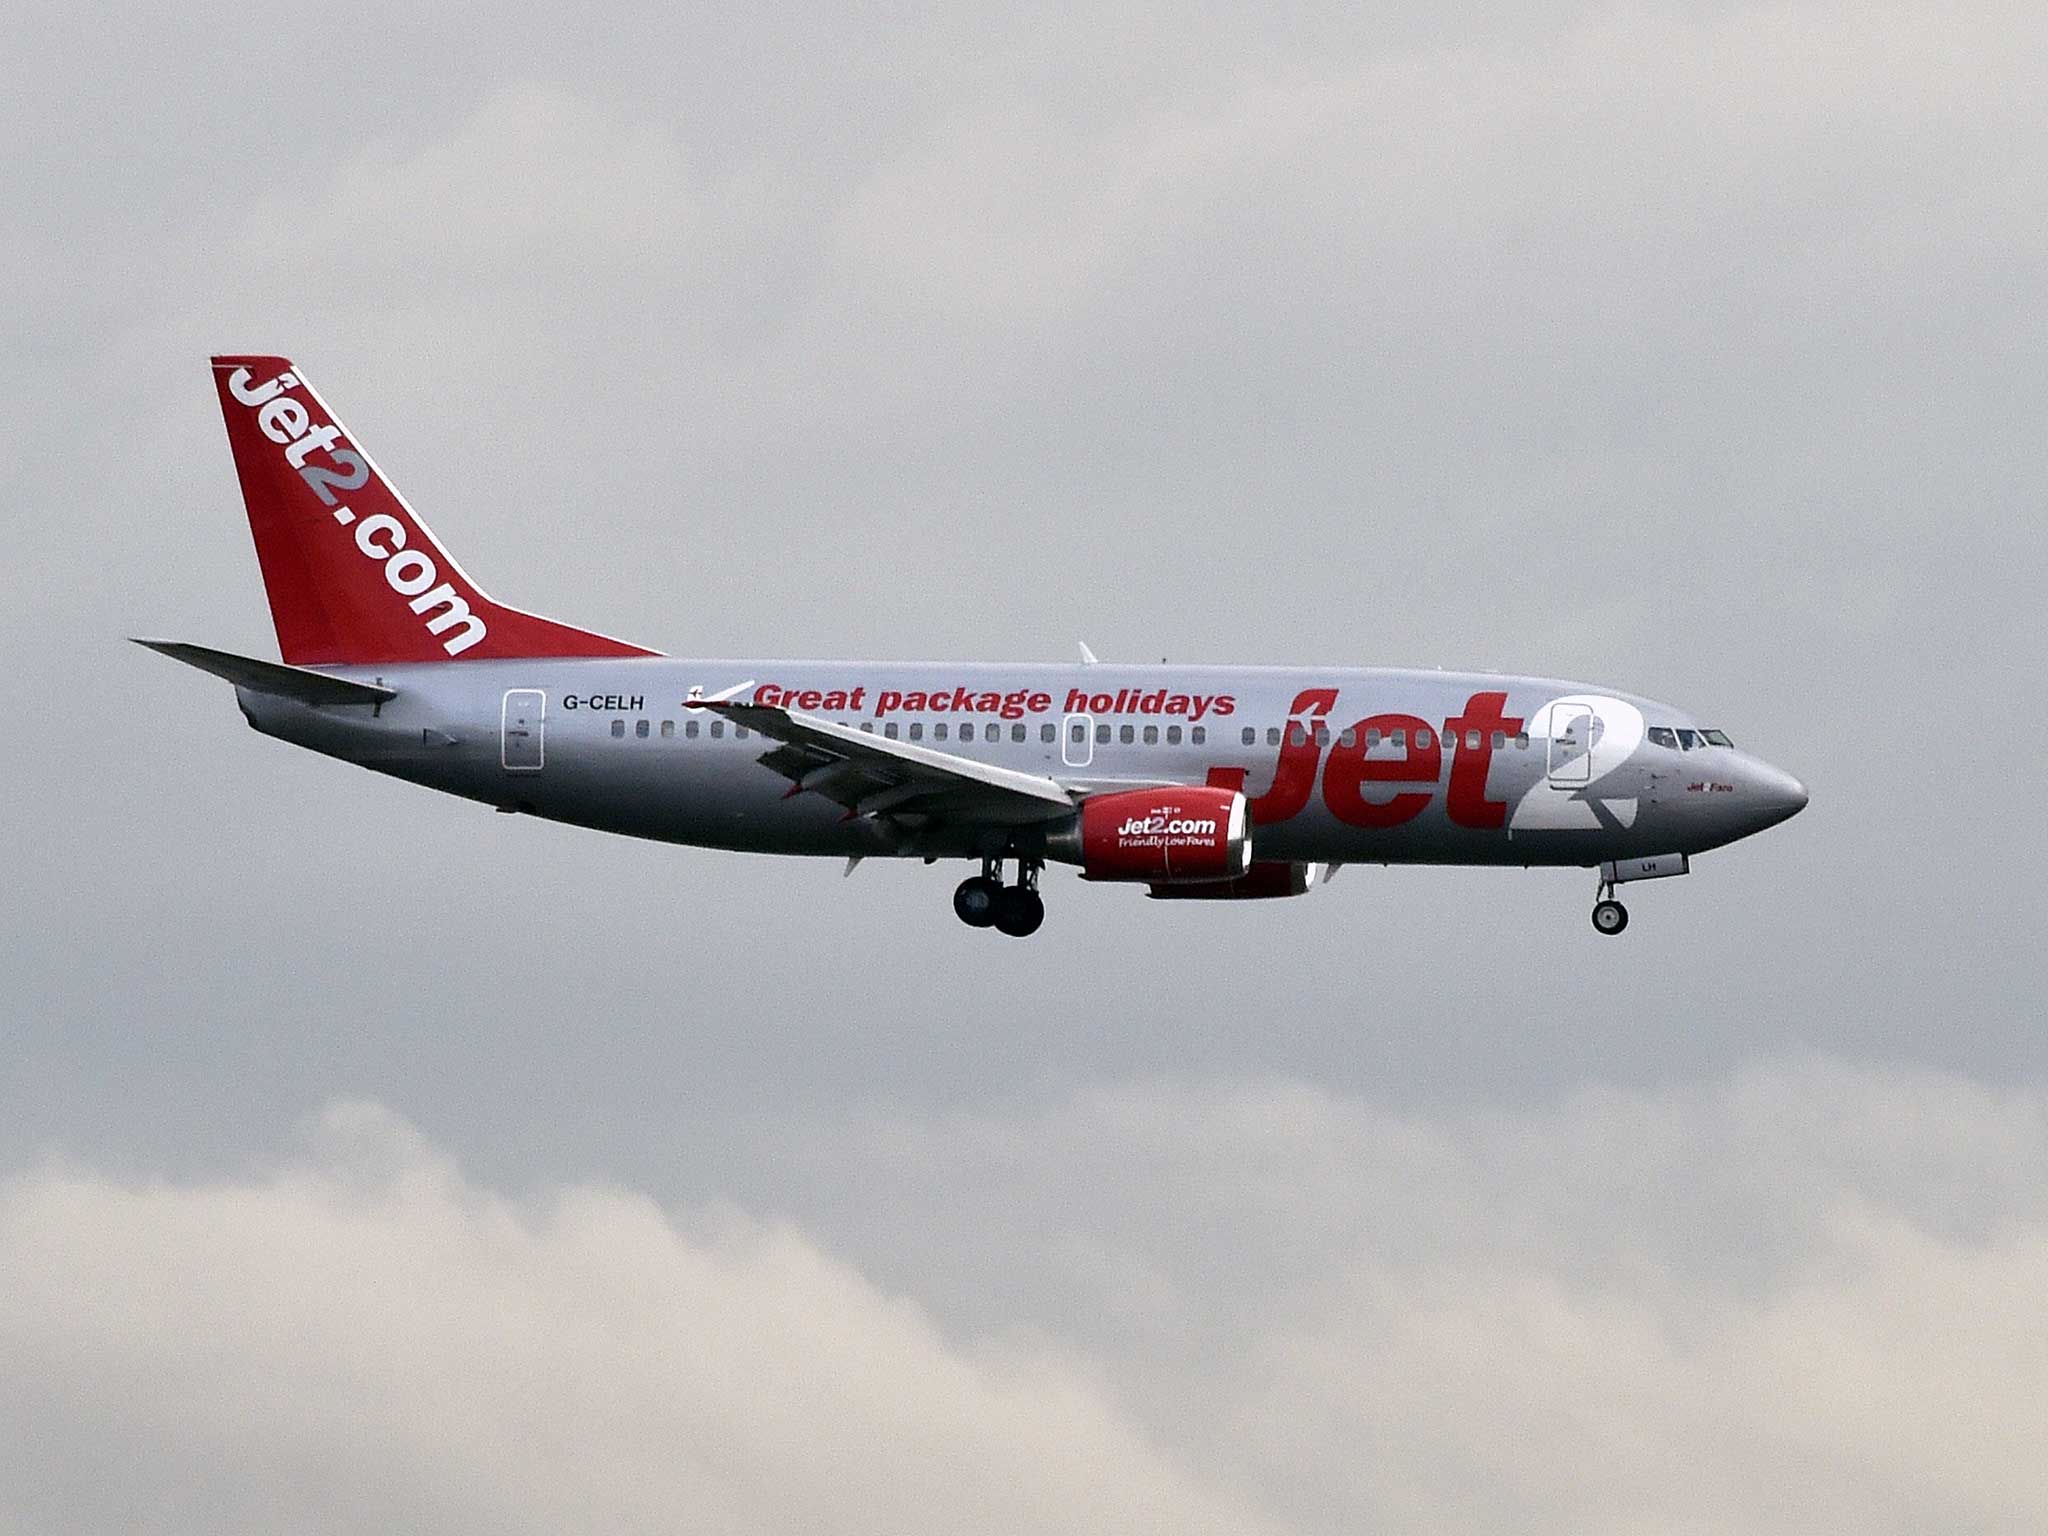 Jet2 is one of several airlines lobbying for more powers to deal with drunk passengers